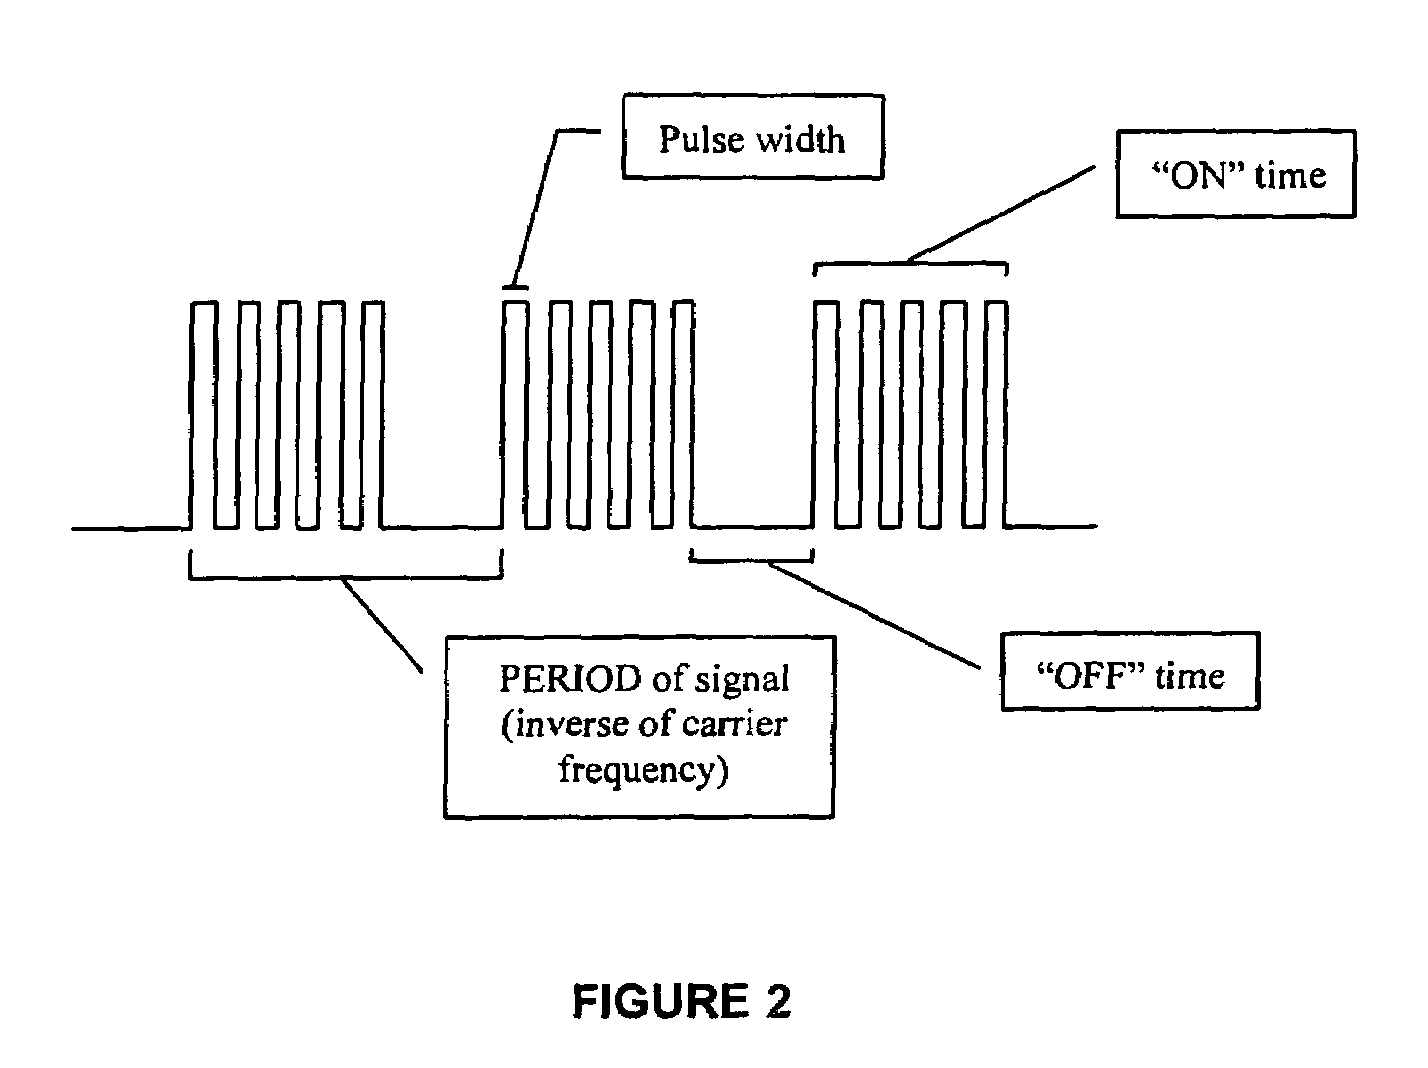 Method and apparatus for utilizing amplitude-modulated pulse-width modulation signals for neurostimulation and treatment of neurological disorders using electrical stimulation